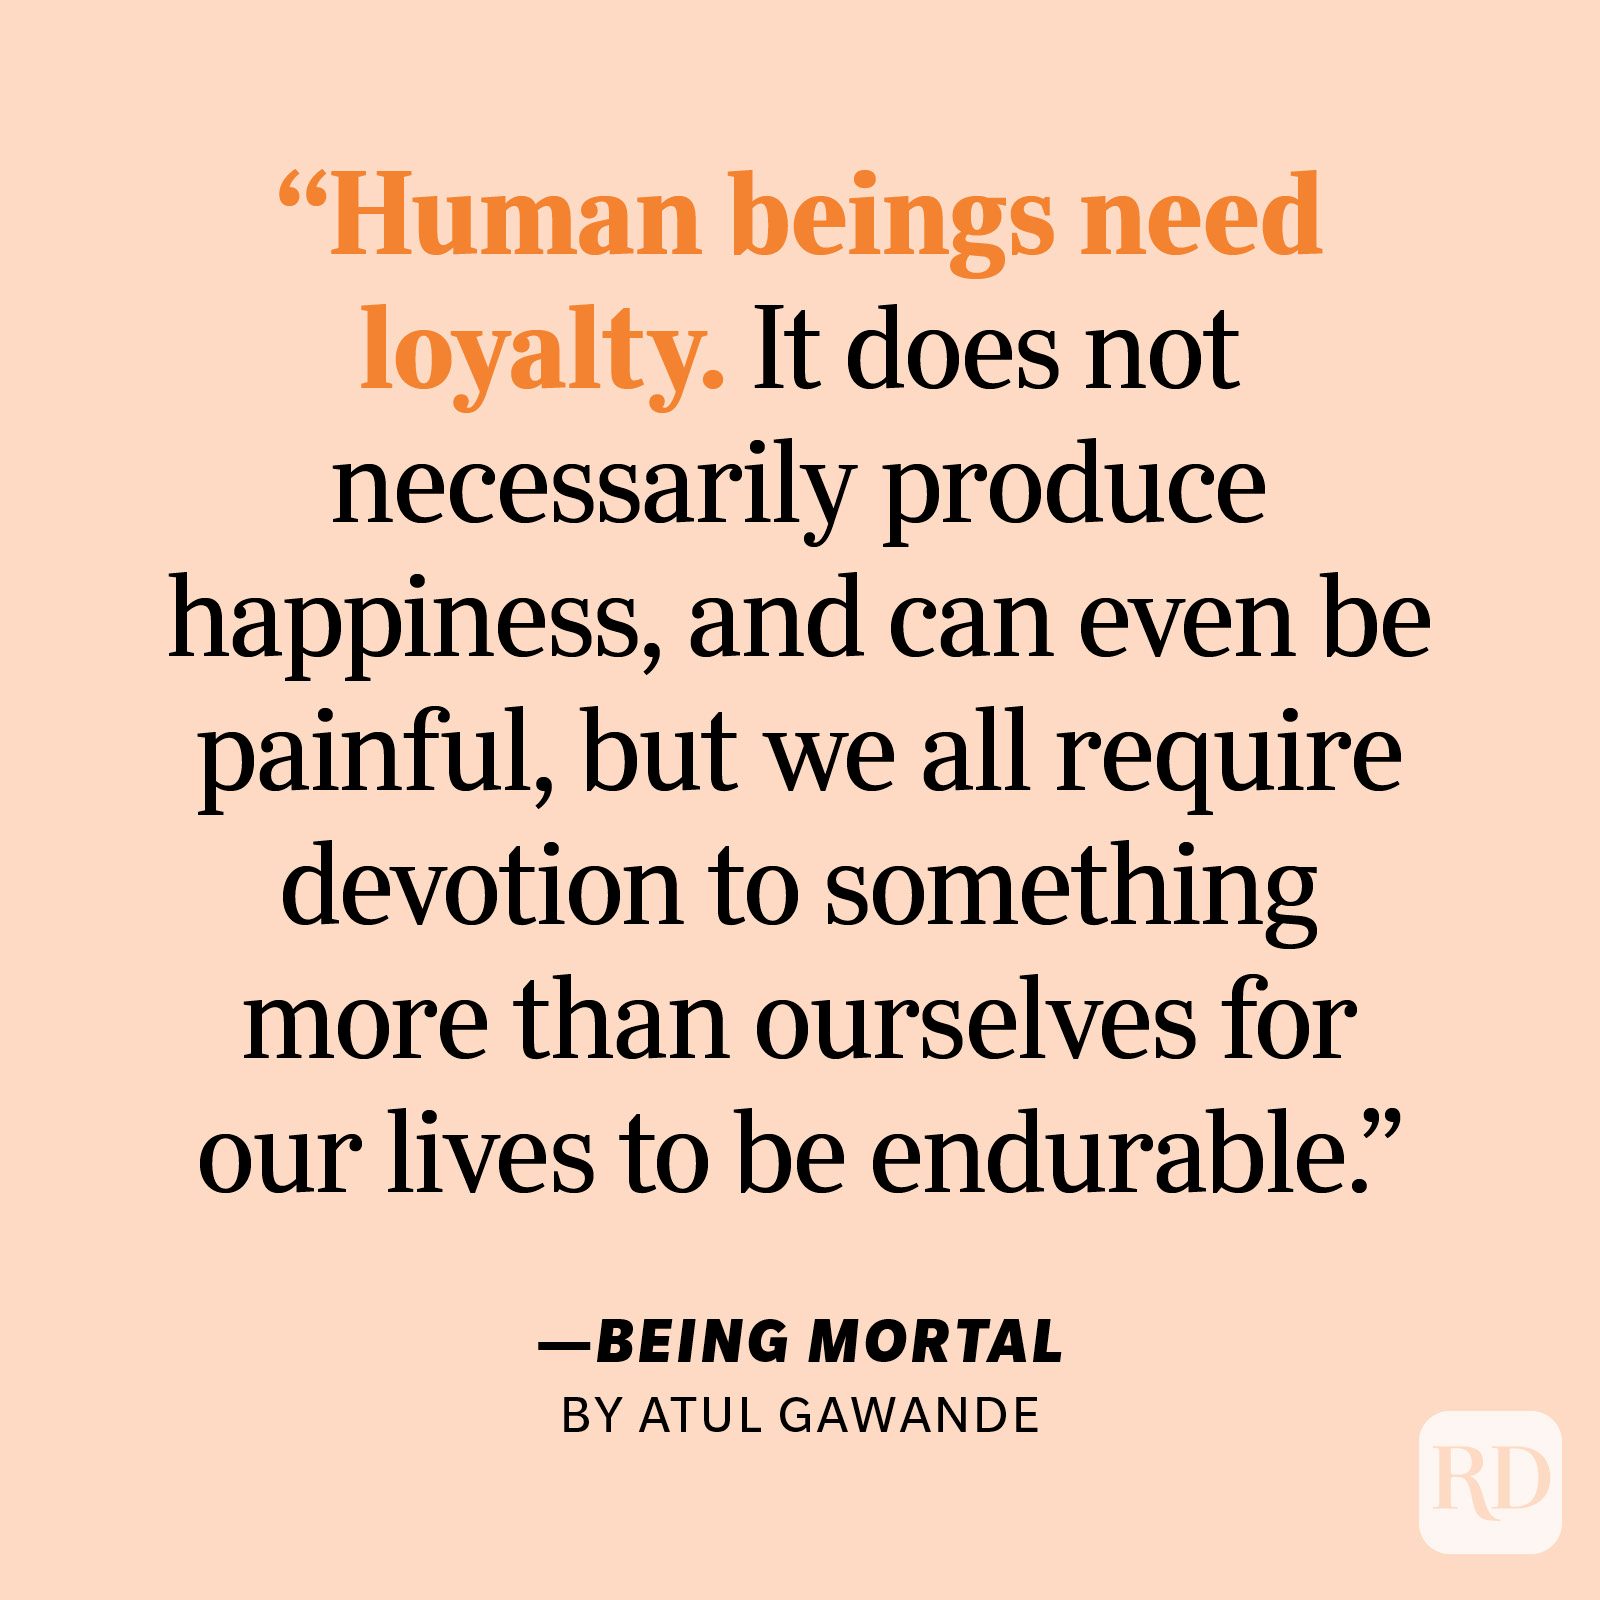 Being Mortal by Atul Gawande "Human beings need loyalty. It does not necessarily produce happiness, and can even be painful, but we all require devotion to something more than ourselves for our lives to be endurable. Without it, we have only our desires to guide us, and they are fleeting, capricious, and insatiable."